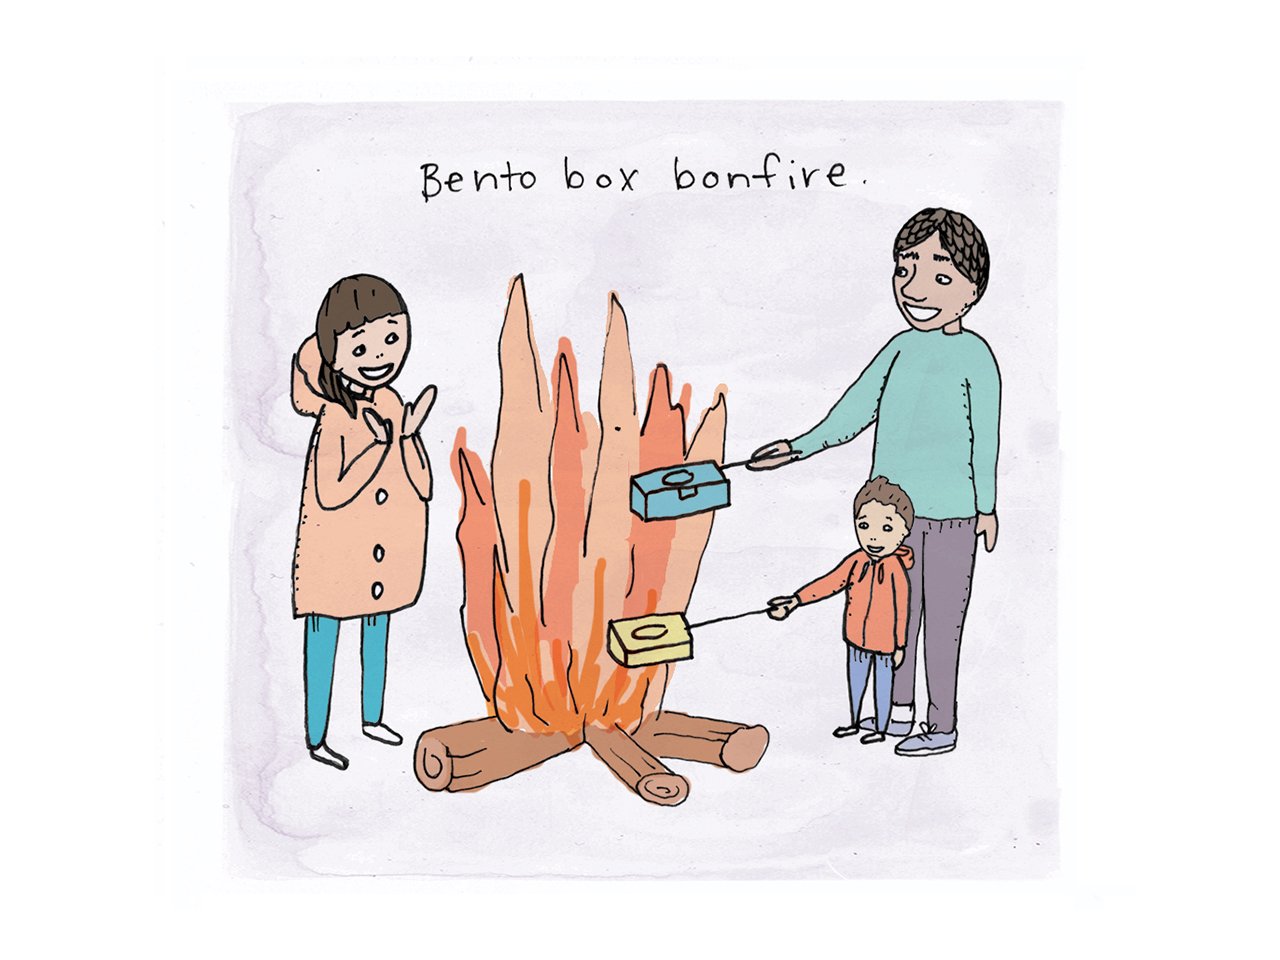 Illustration of a family standing around a bonfire holding boxes on the end of sticks. Text reads: Bento box bonfire